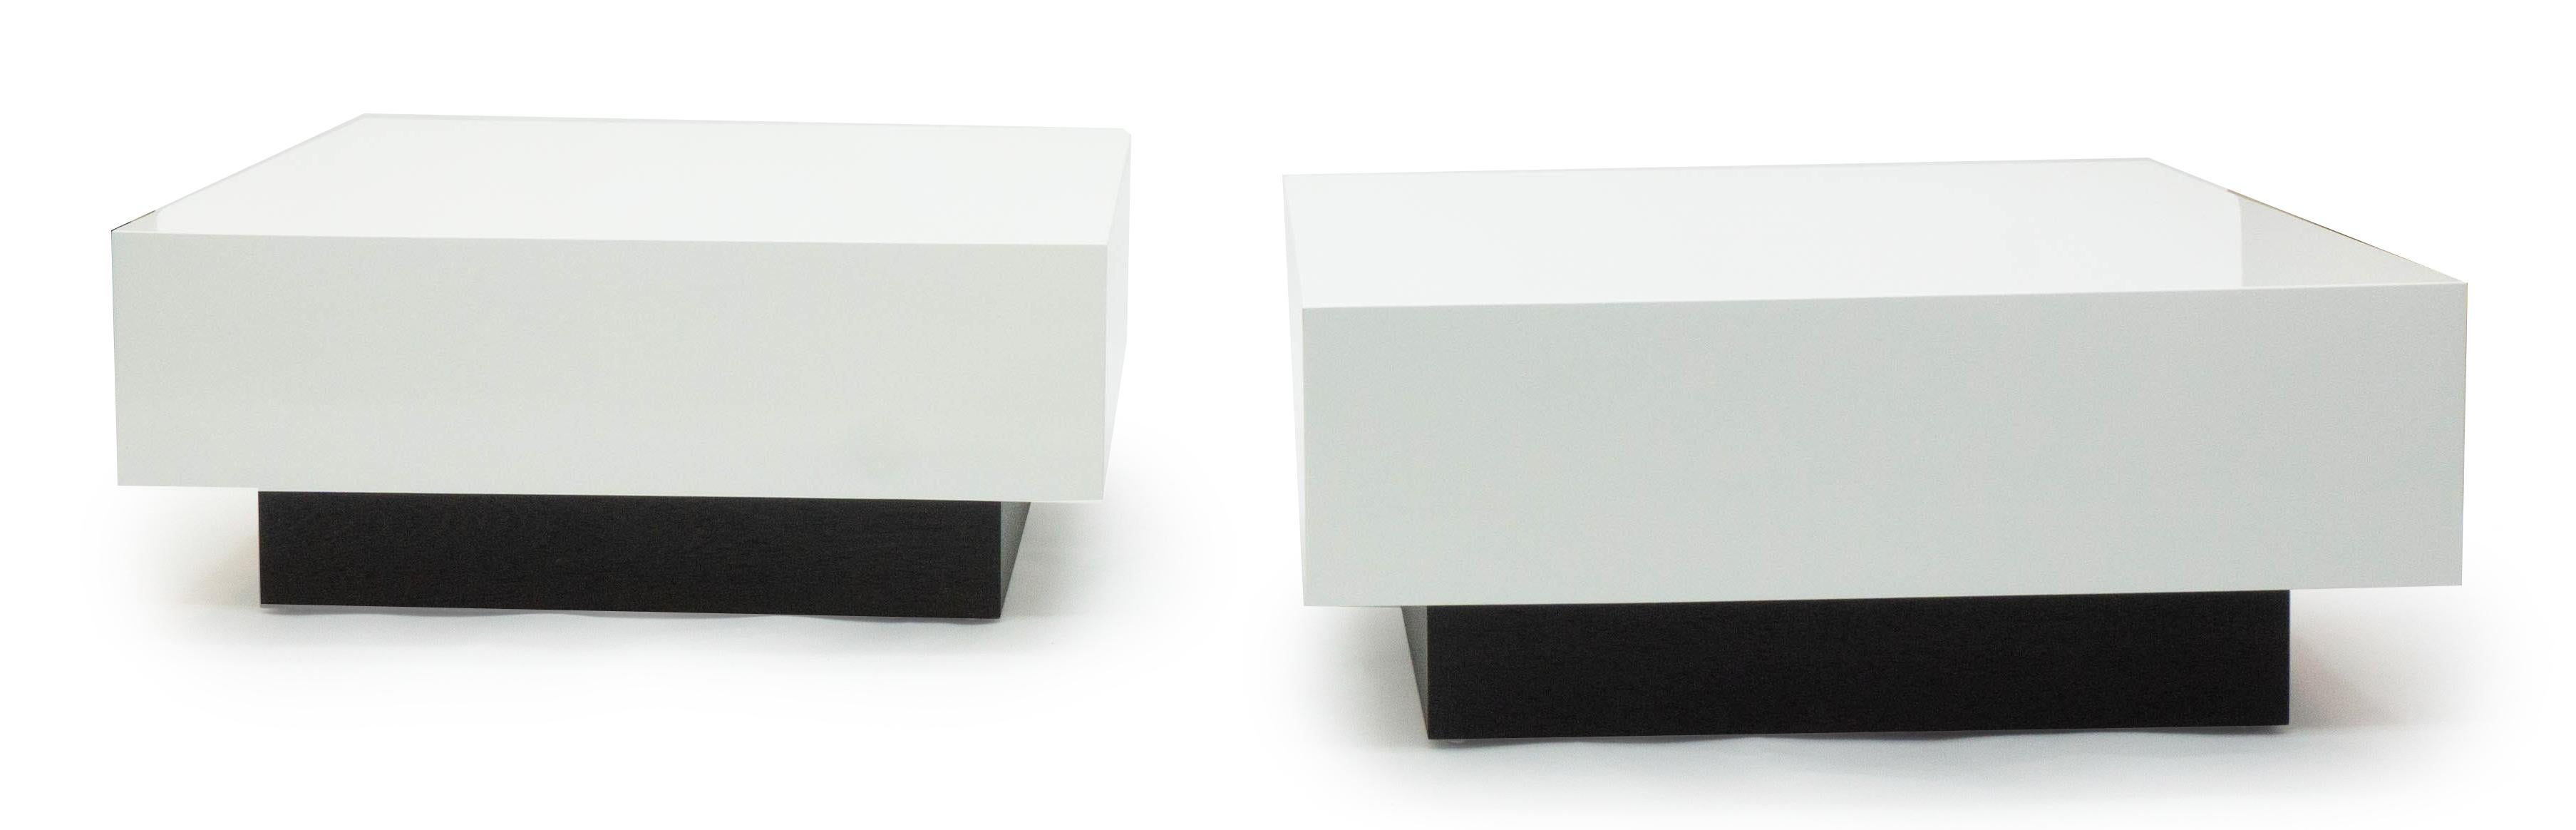 American Modern Lacquered Square Coffee Table